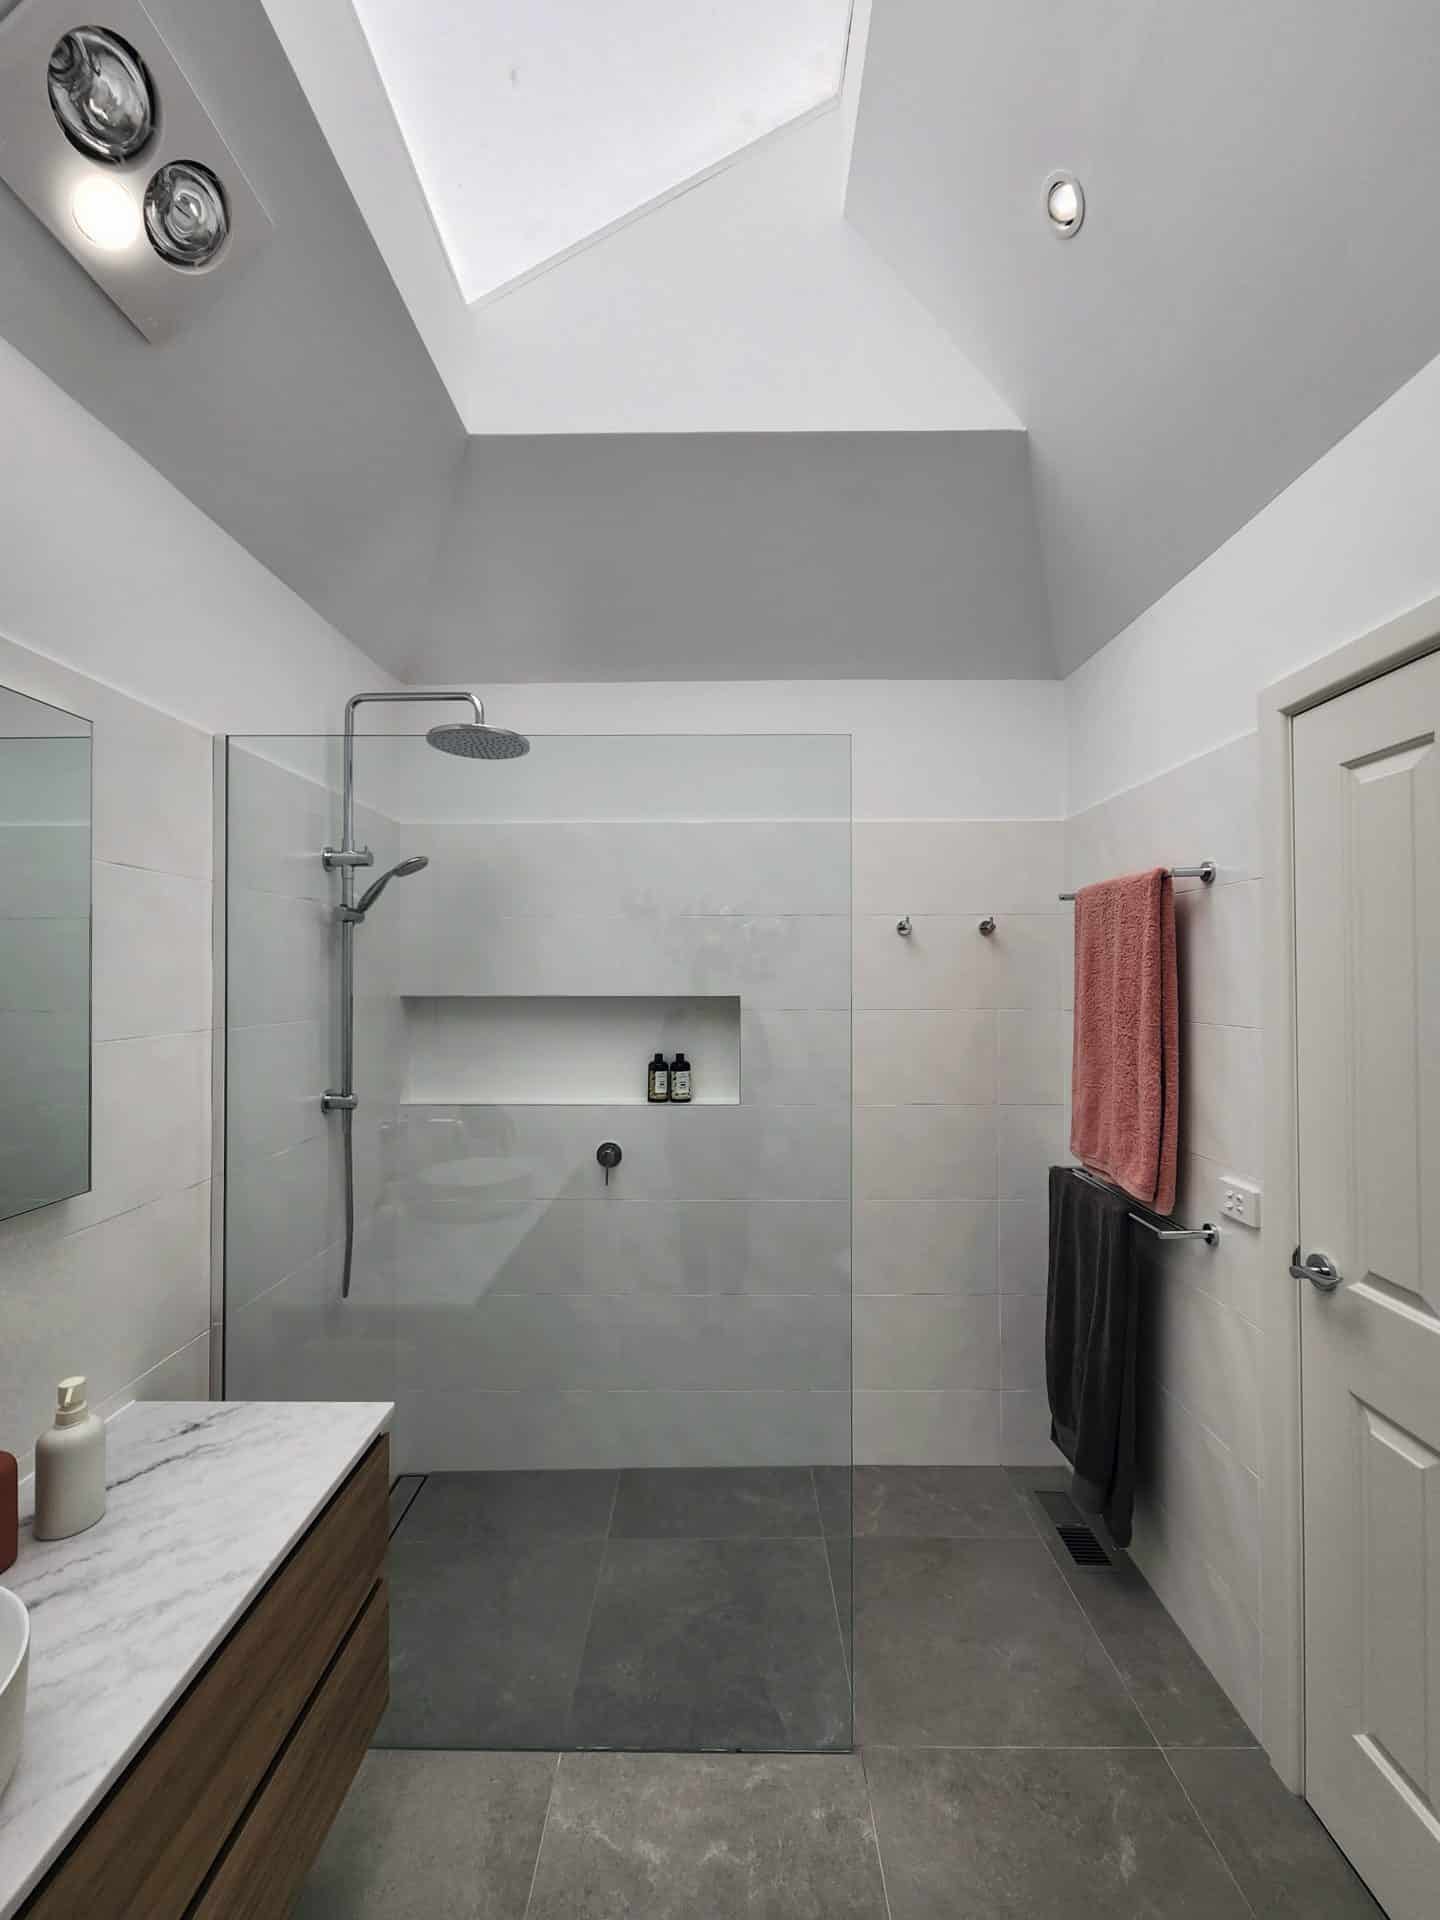 A renovated bathroom with a skylight over the shower.